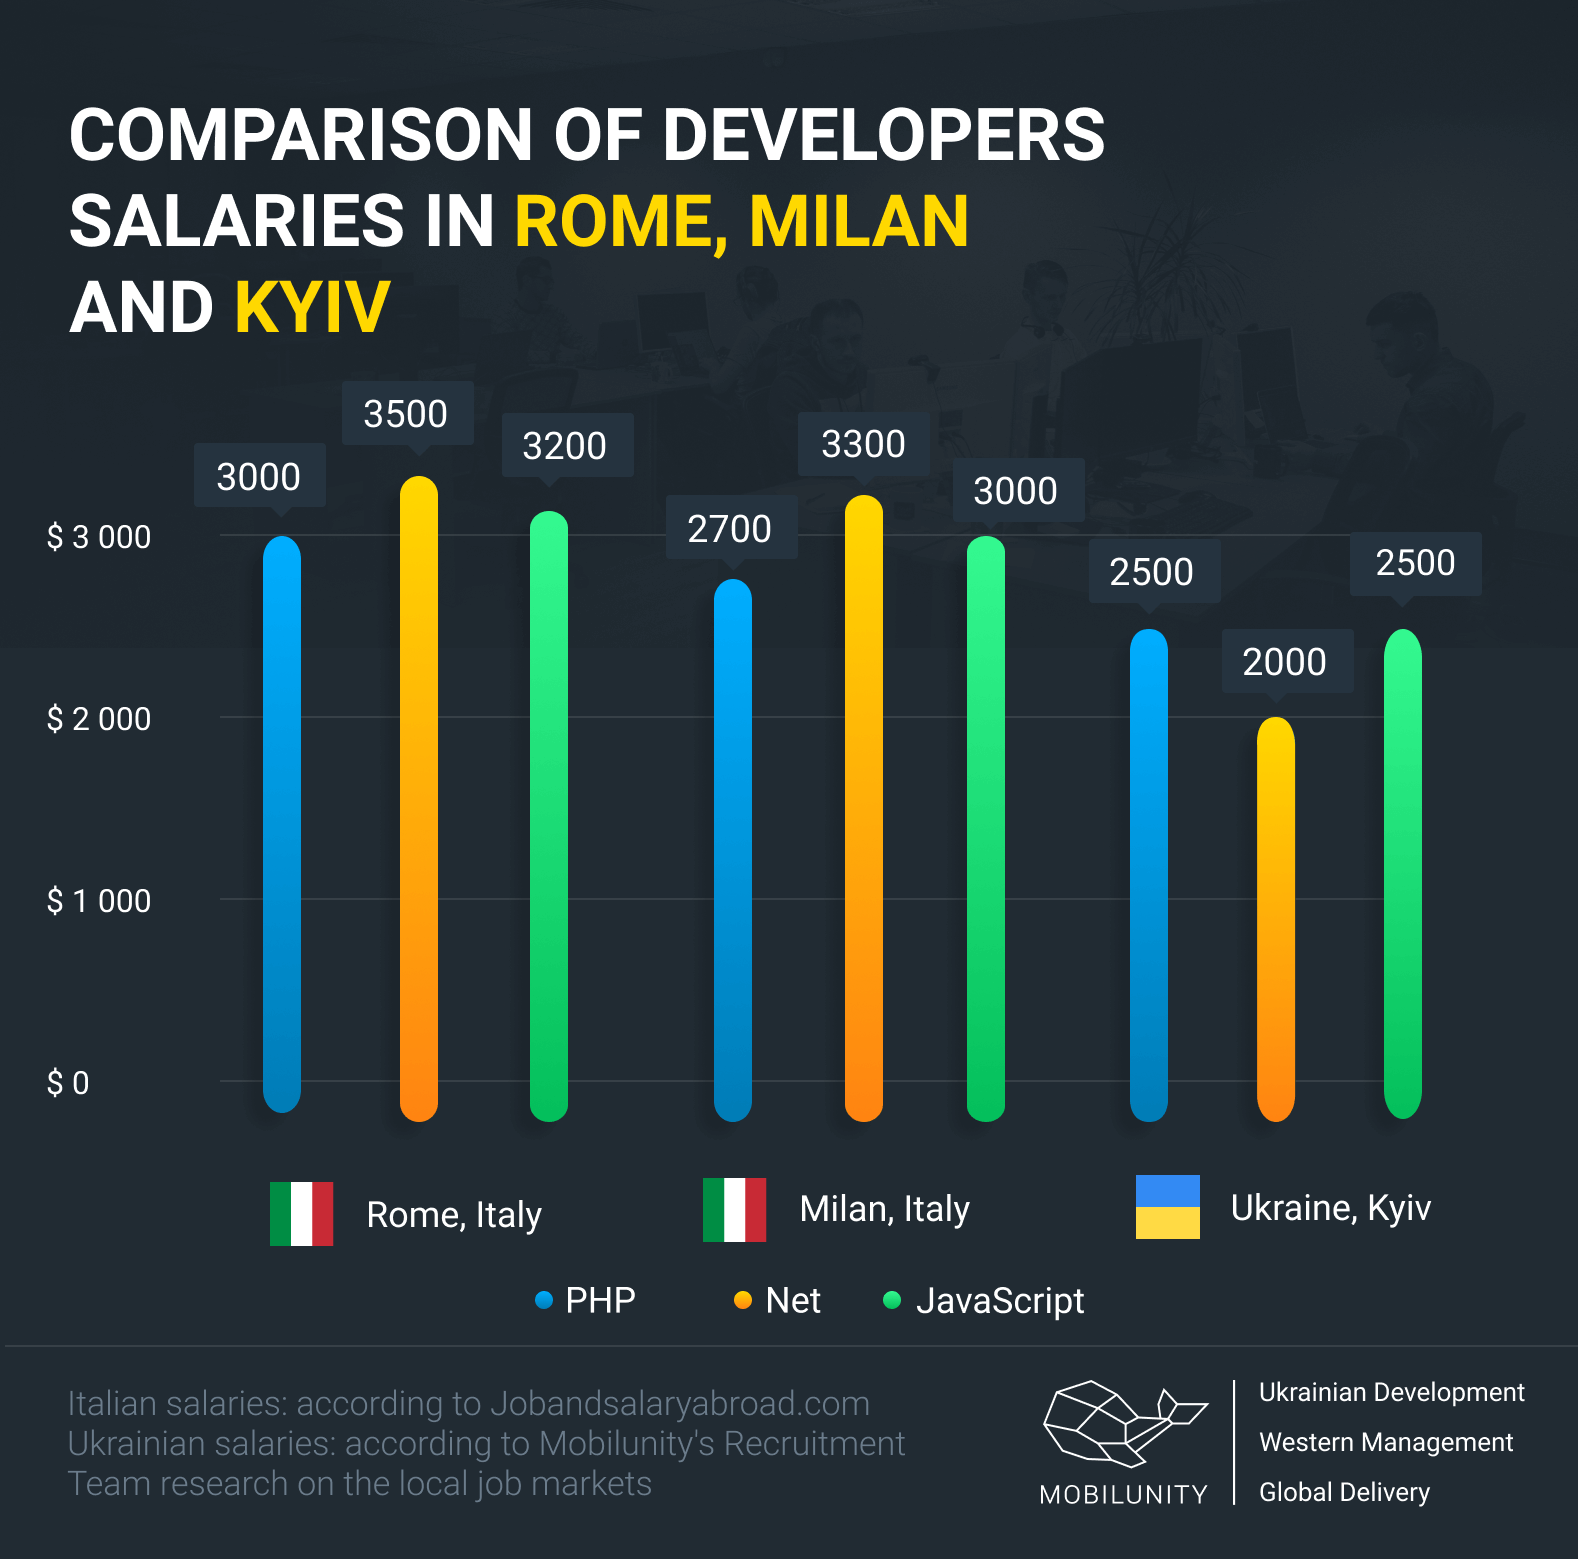 hire developers in Rome, Milan or in Kyiv, Ukraine